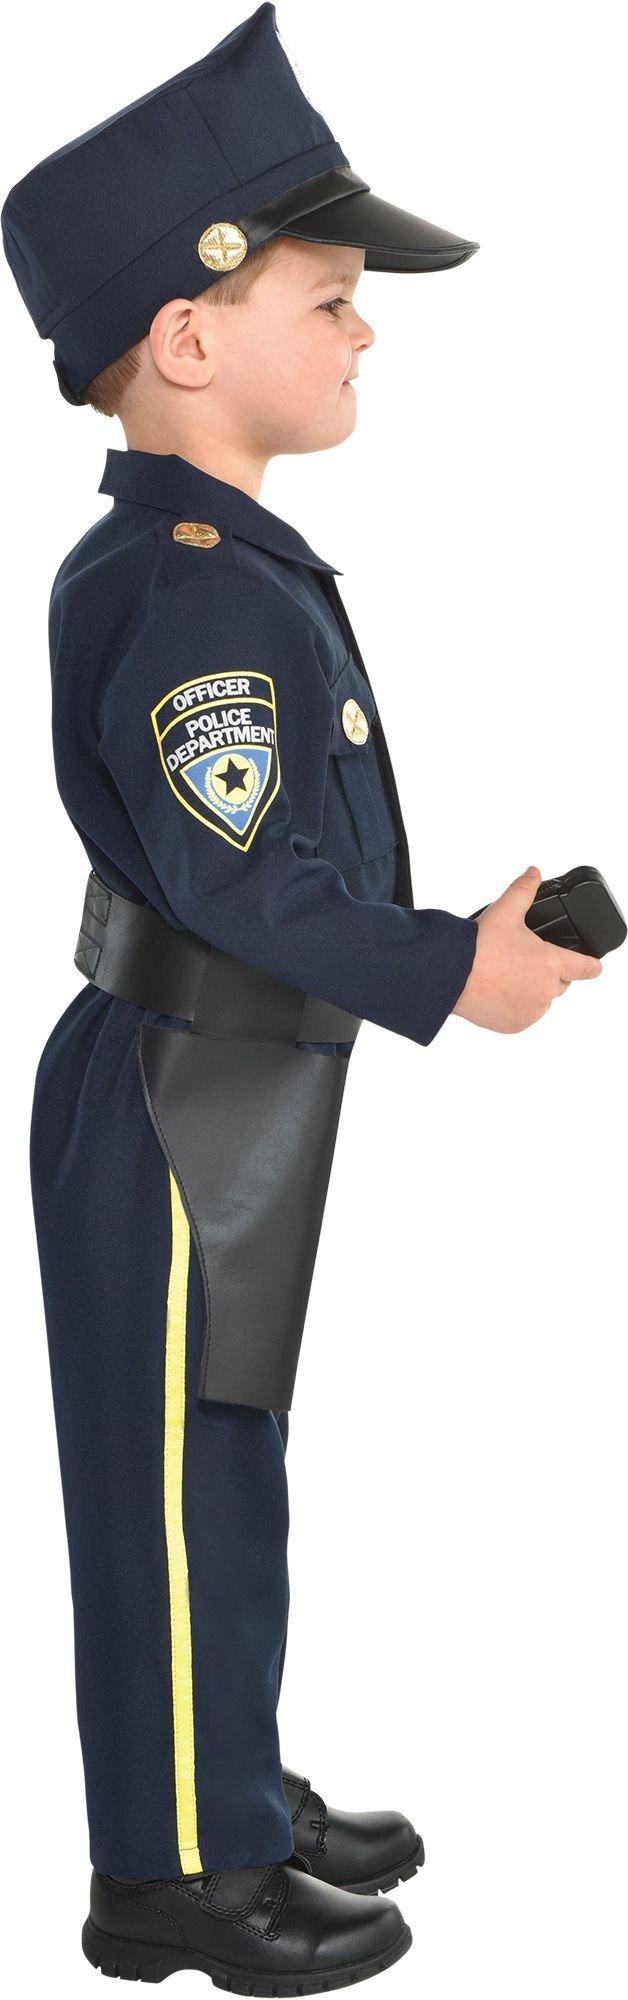 Boys Classic Police Officer Costume